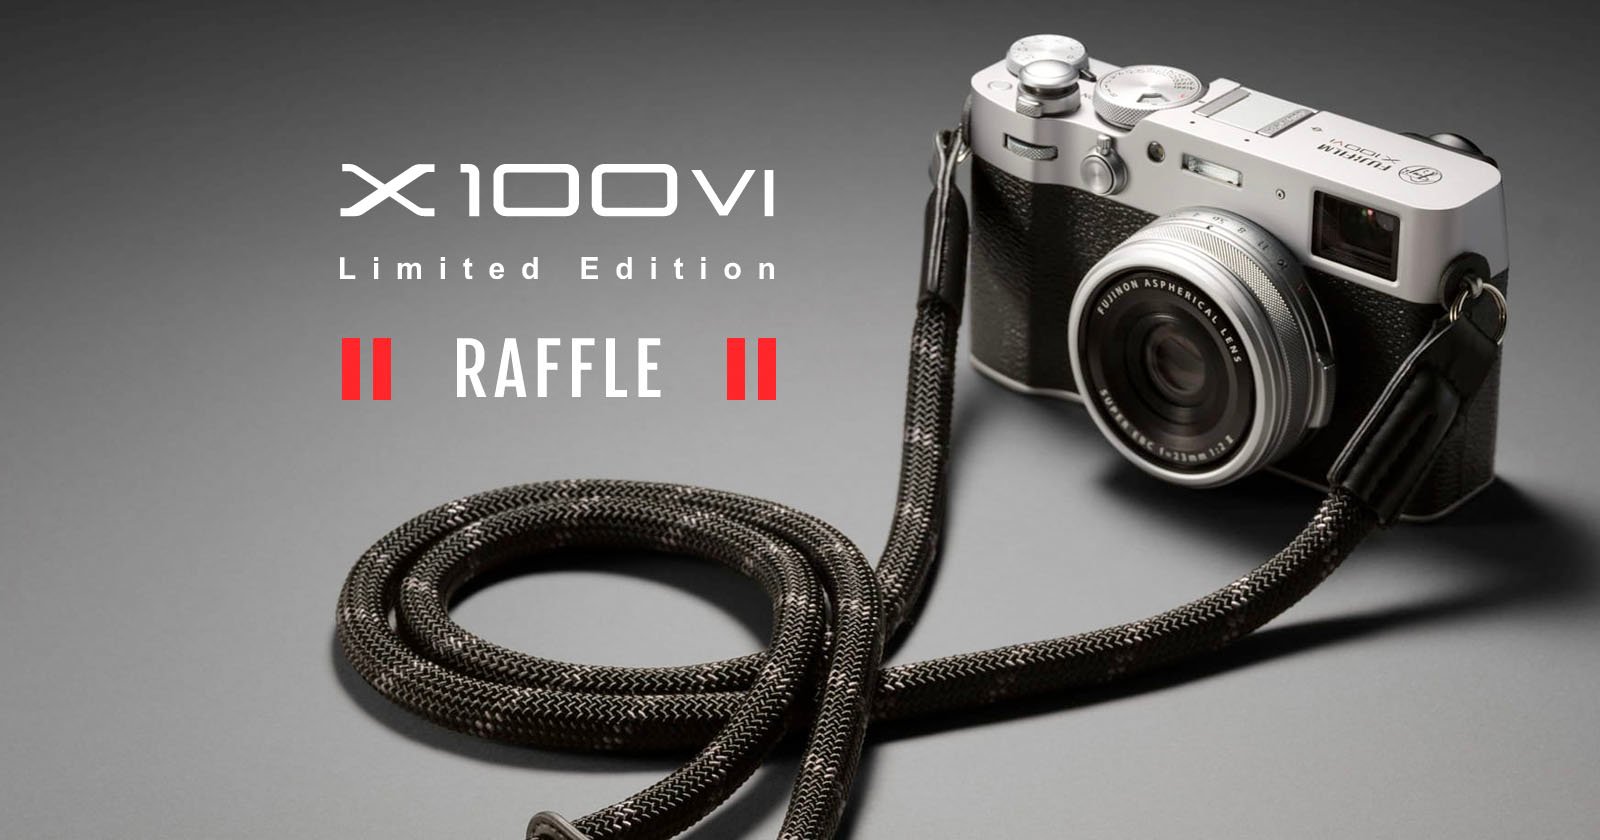  two-thirds limited edition x100vi sales were 